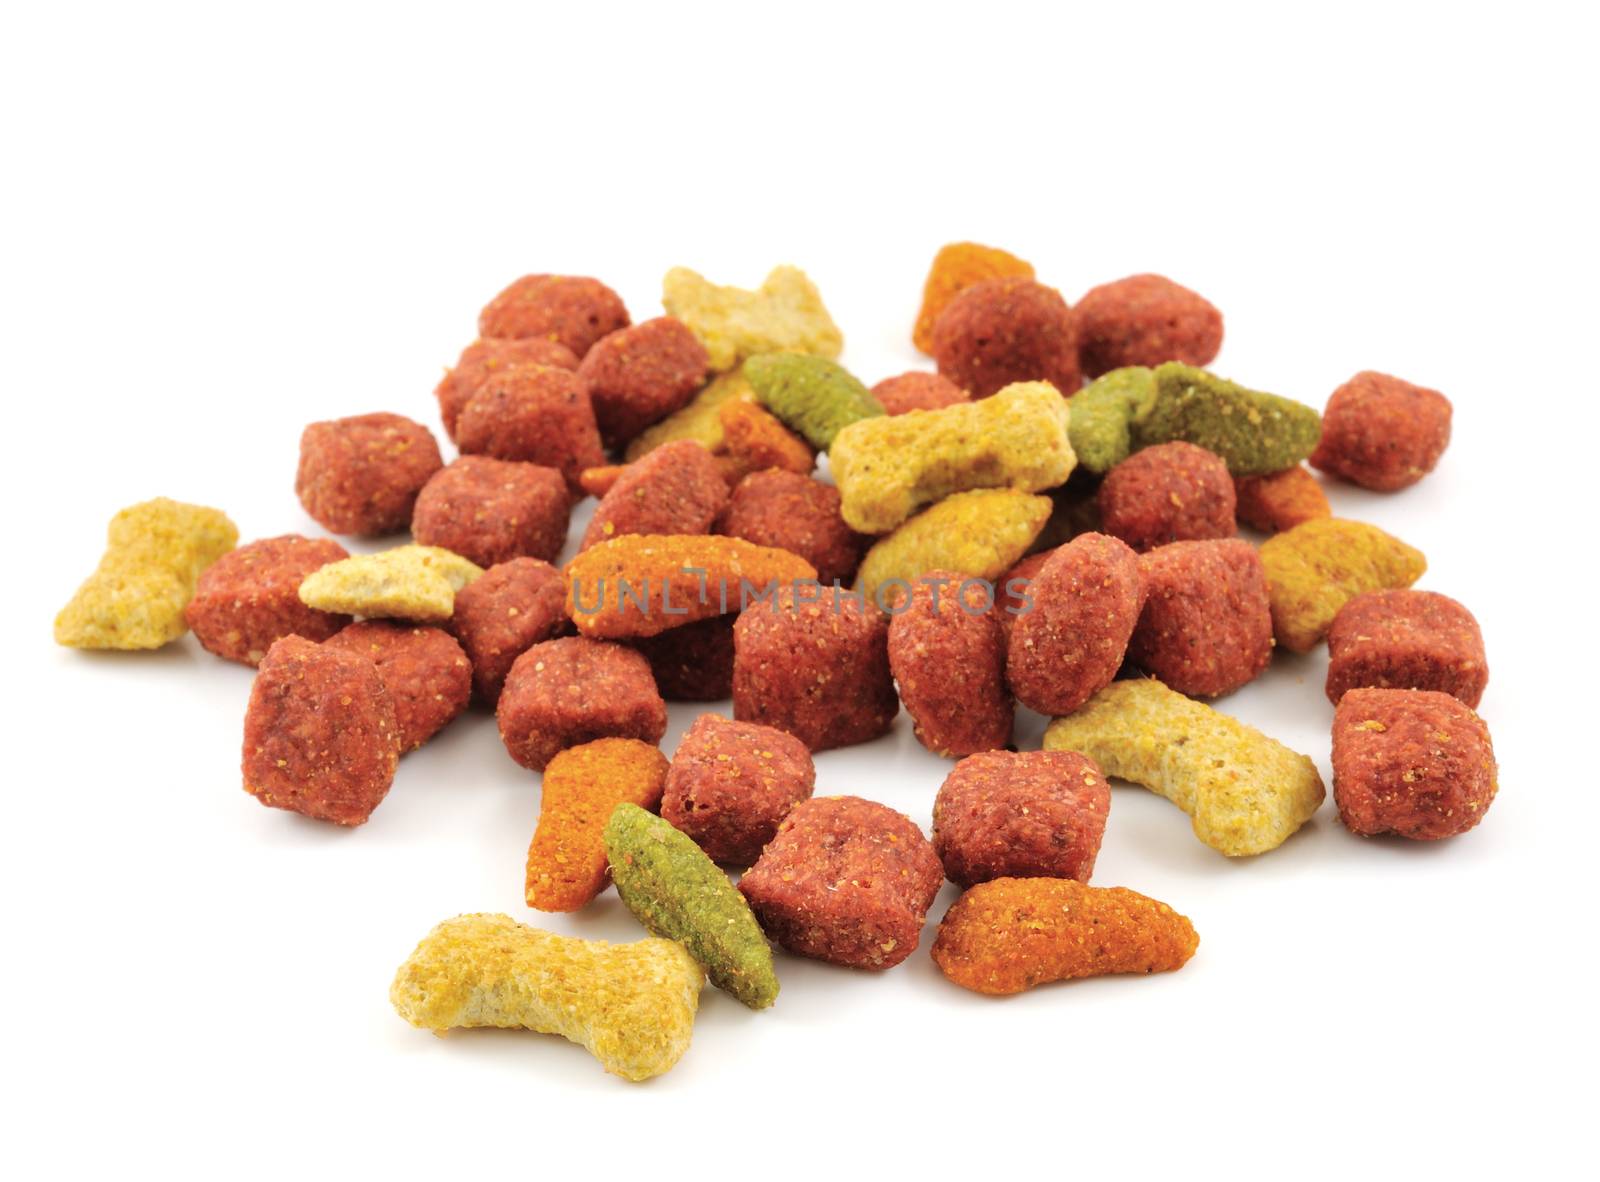 Dry dog food on white background. by sommai